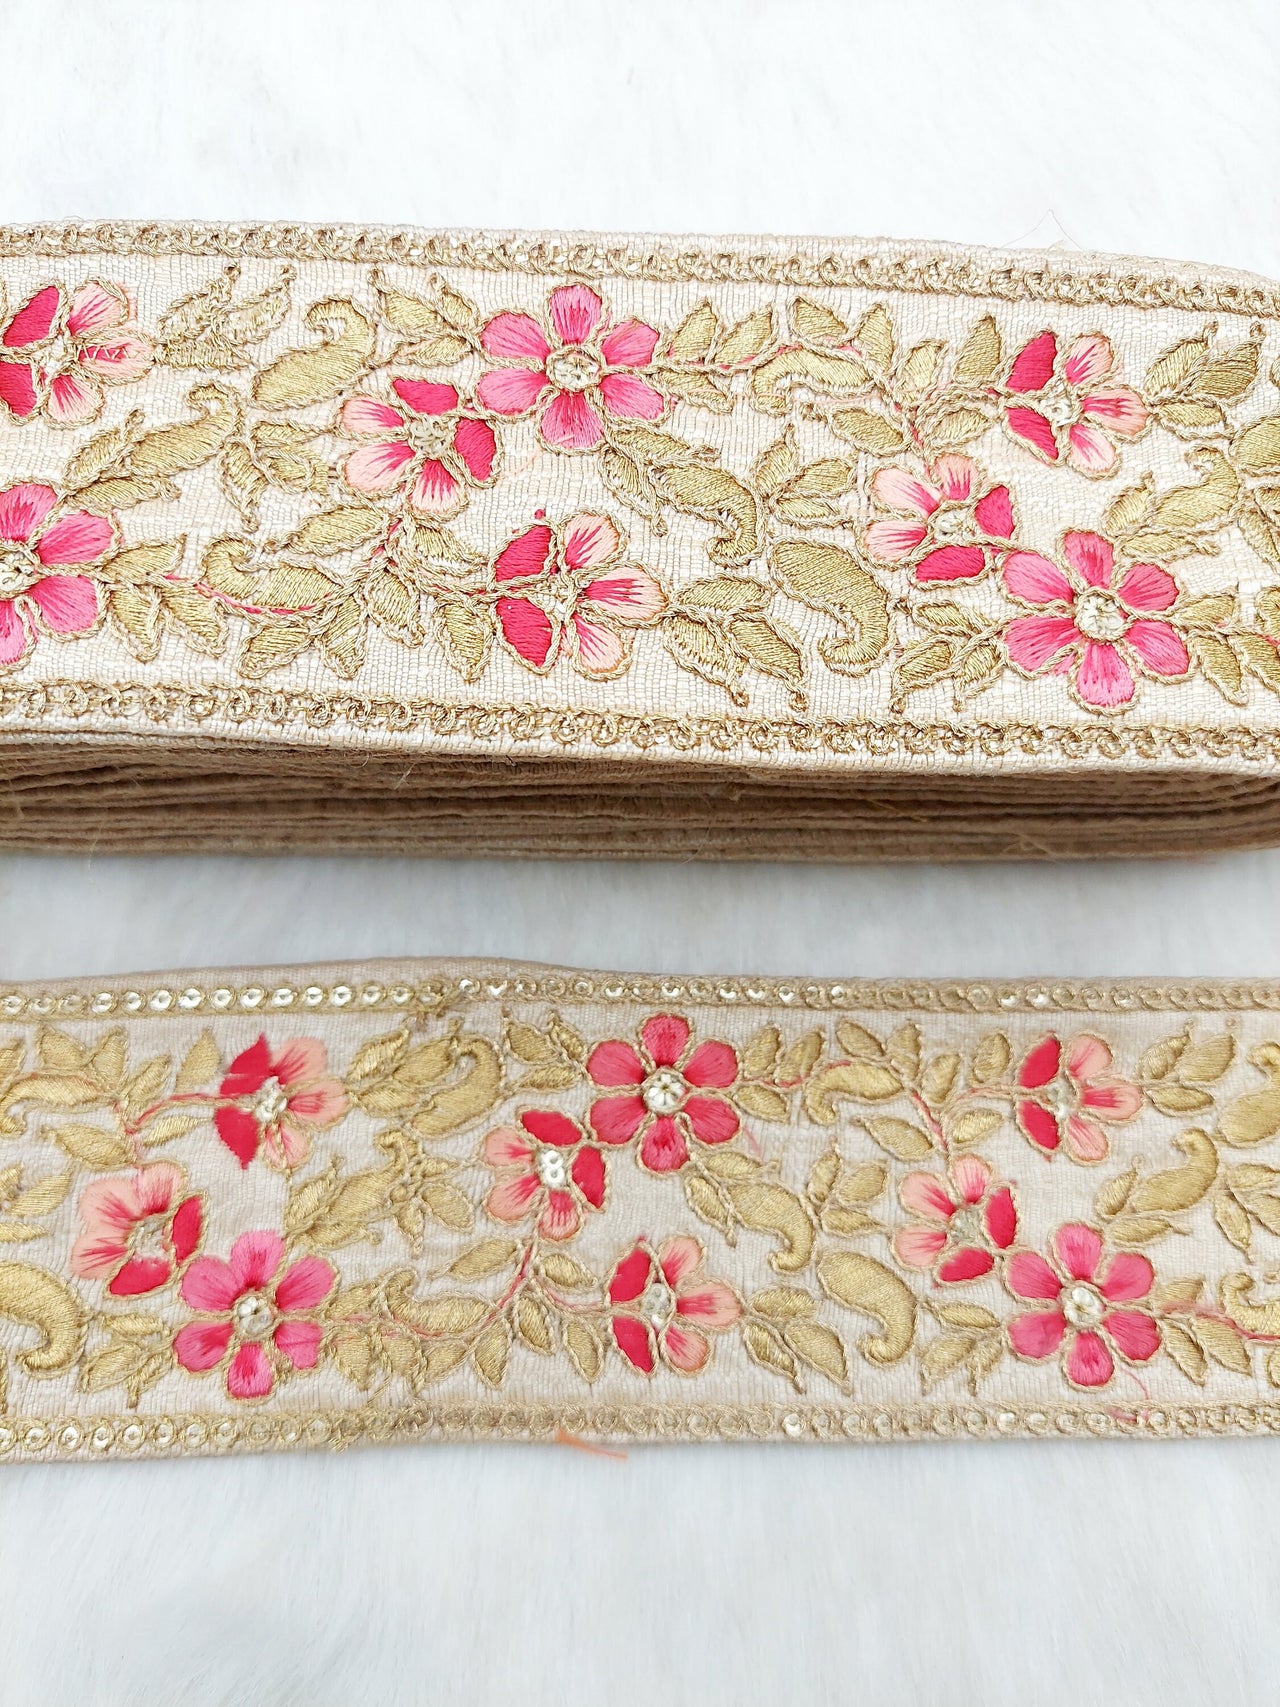 Beige Silk Fabric Trim with Gold and Pink Floral Embroidery, Sari Border Trim, Trim by Yard